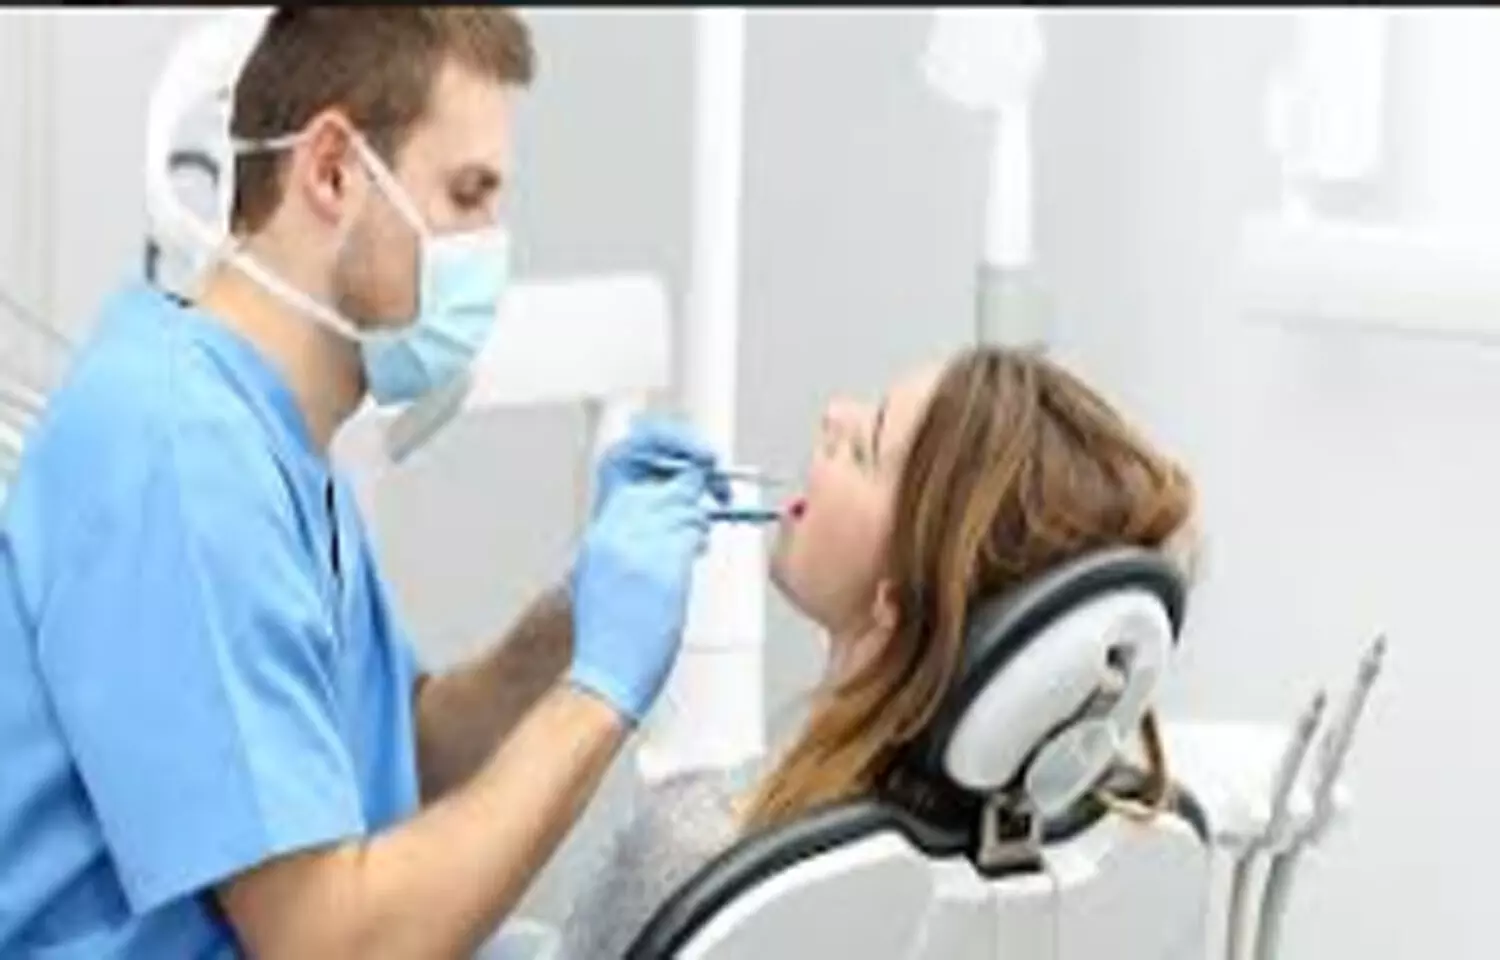 Good dental health may help prevent heart infection from mouth bacteria